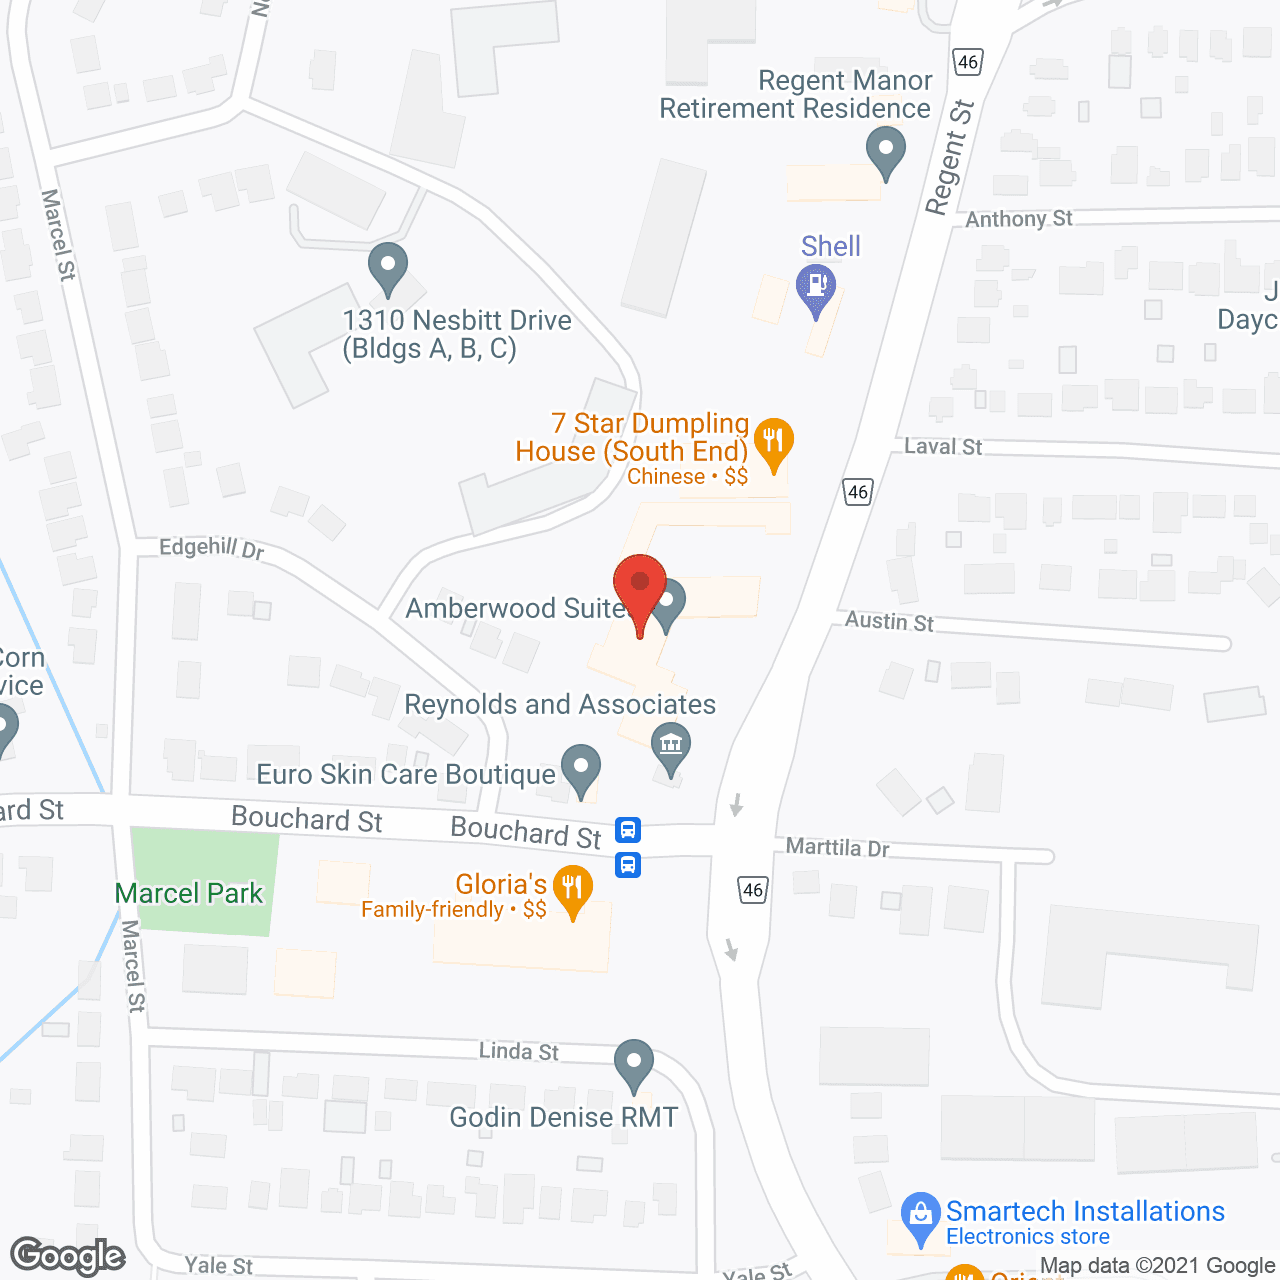 The Amberwood Suites in google map